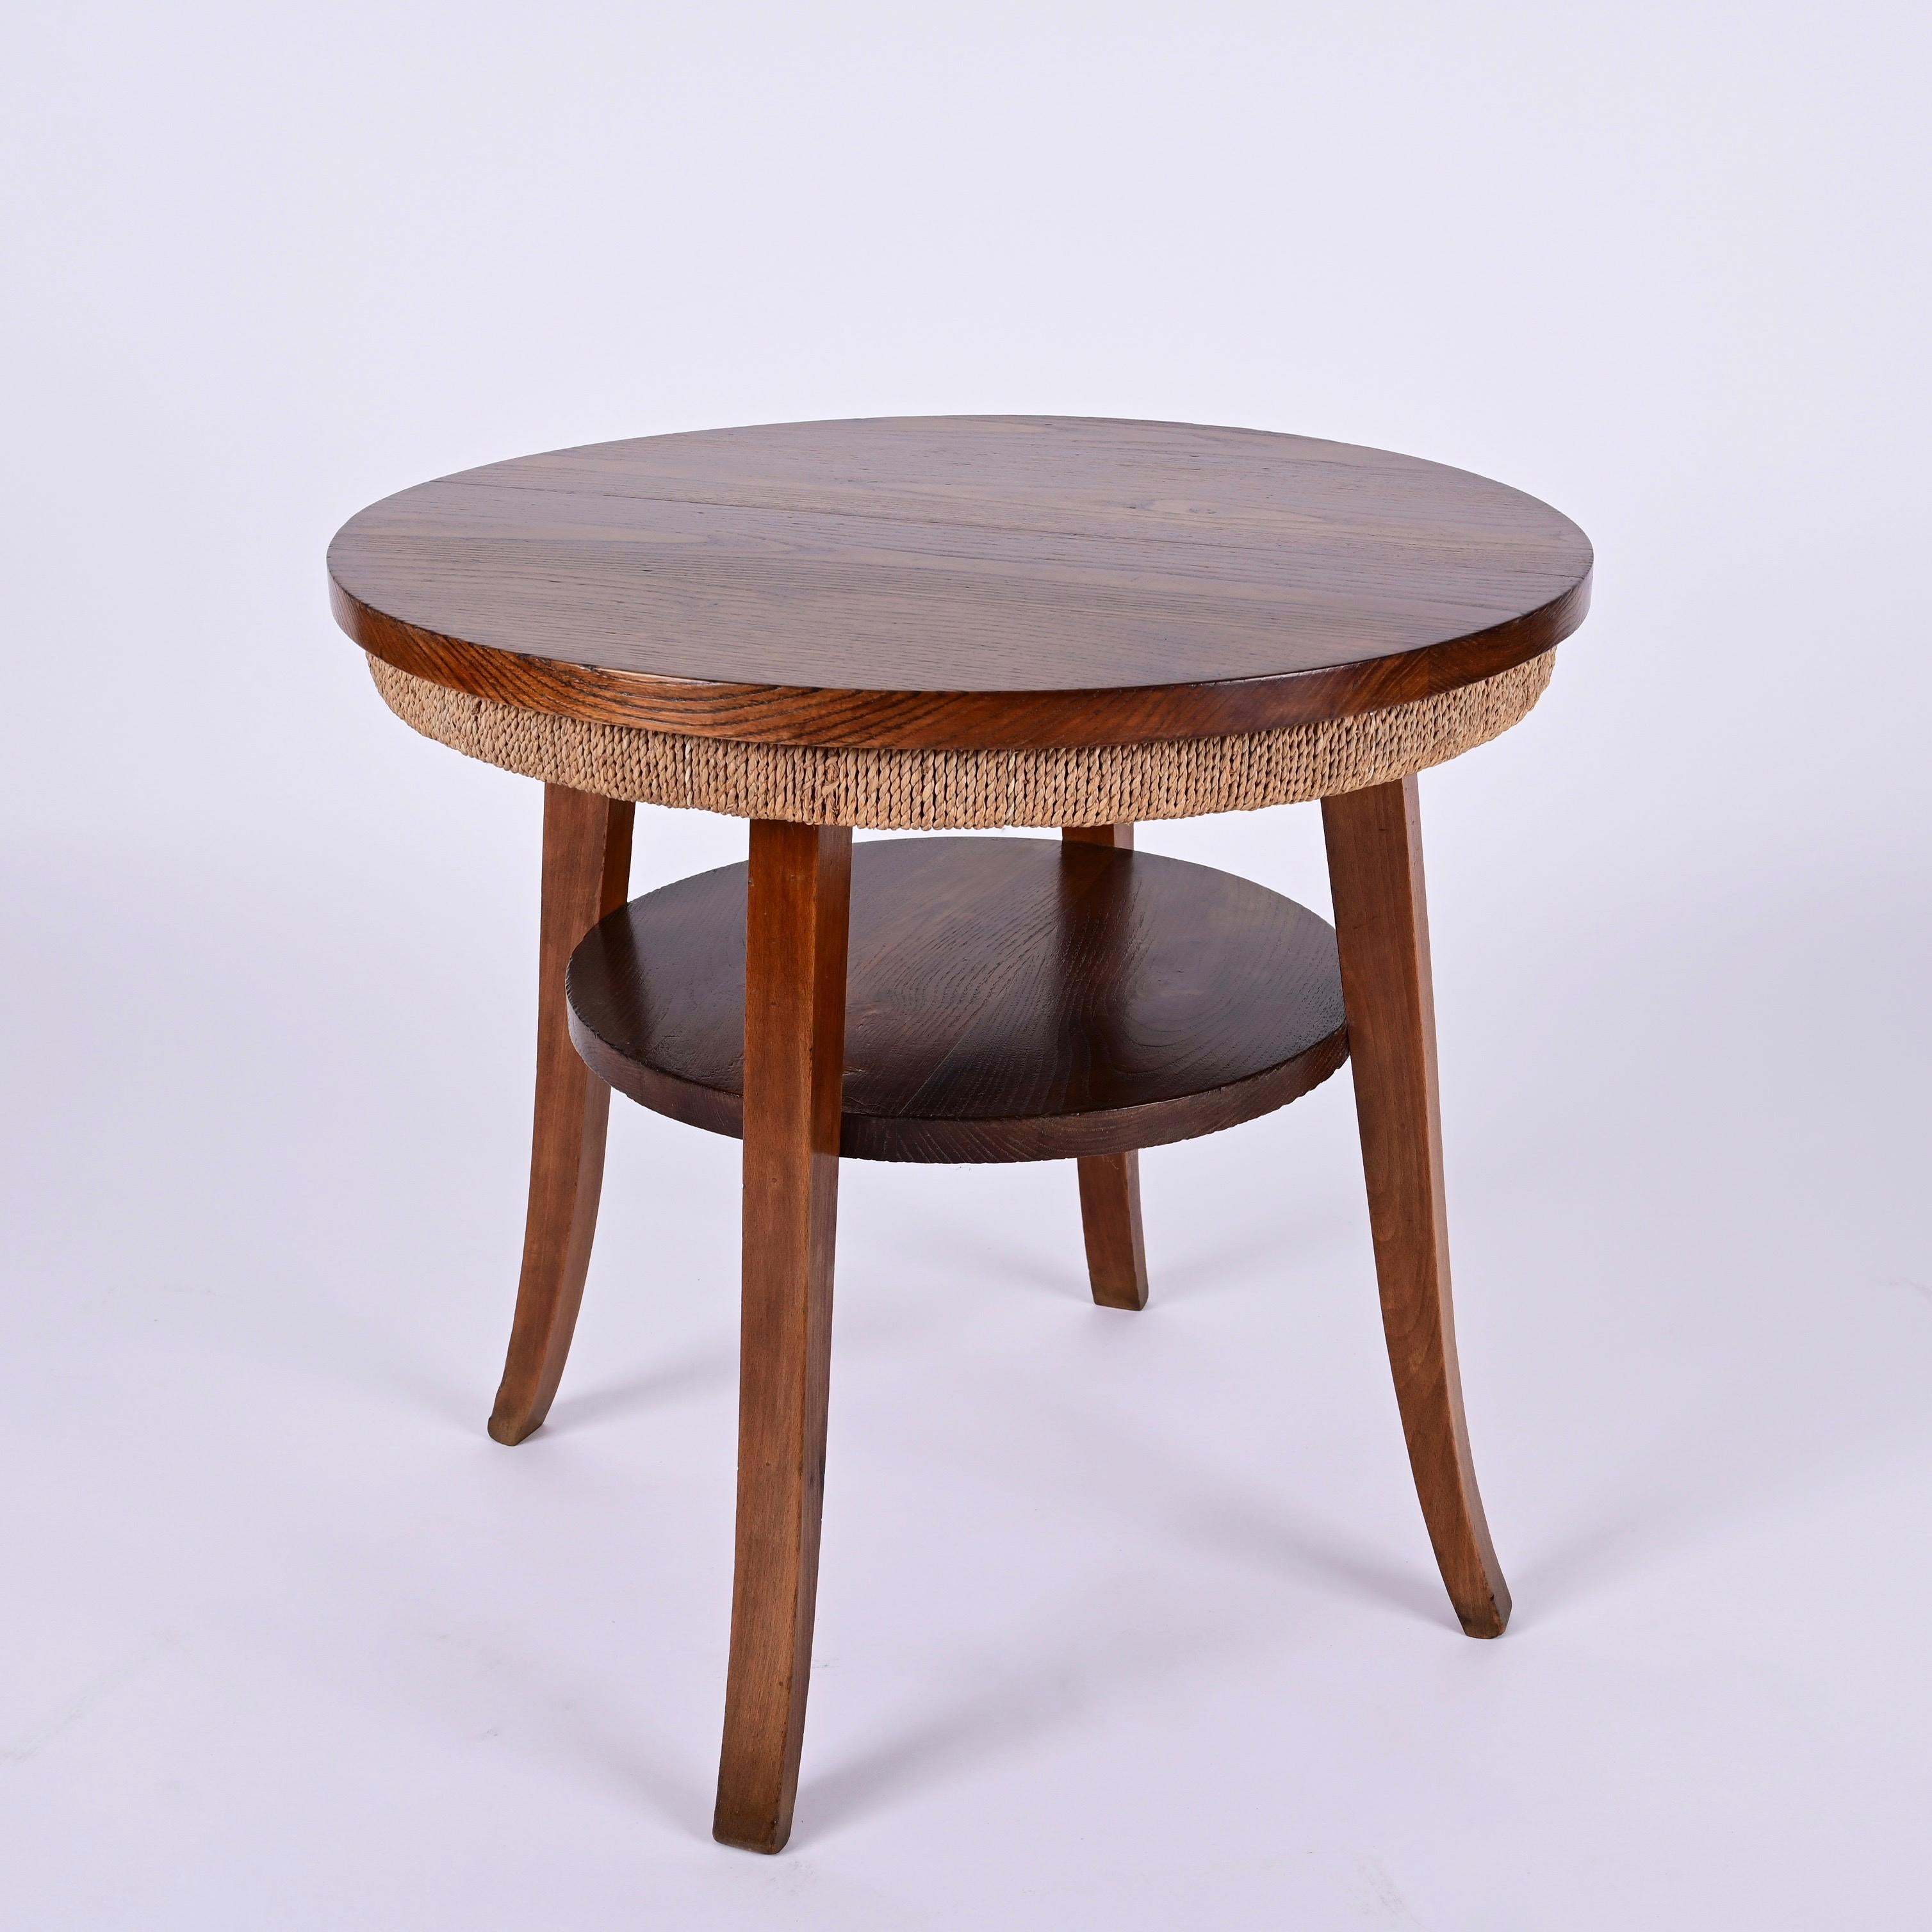 Midcentury Two-Tier Round Rope and Chestnut Wood Italian Coffee Table, 1950s For Sale 2